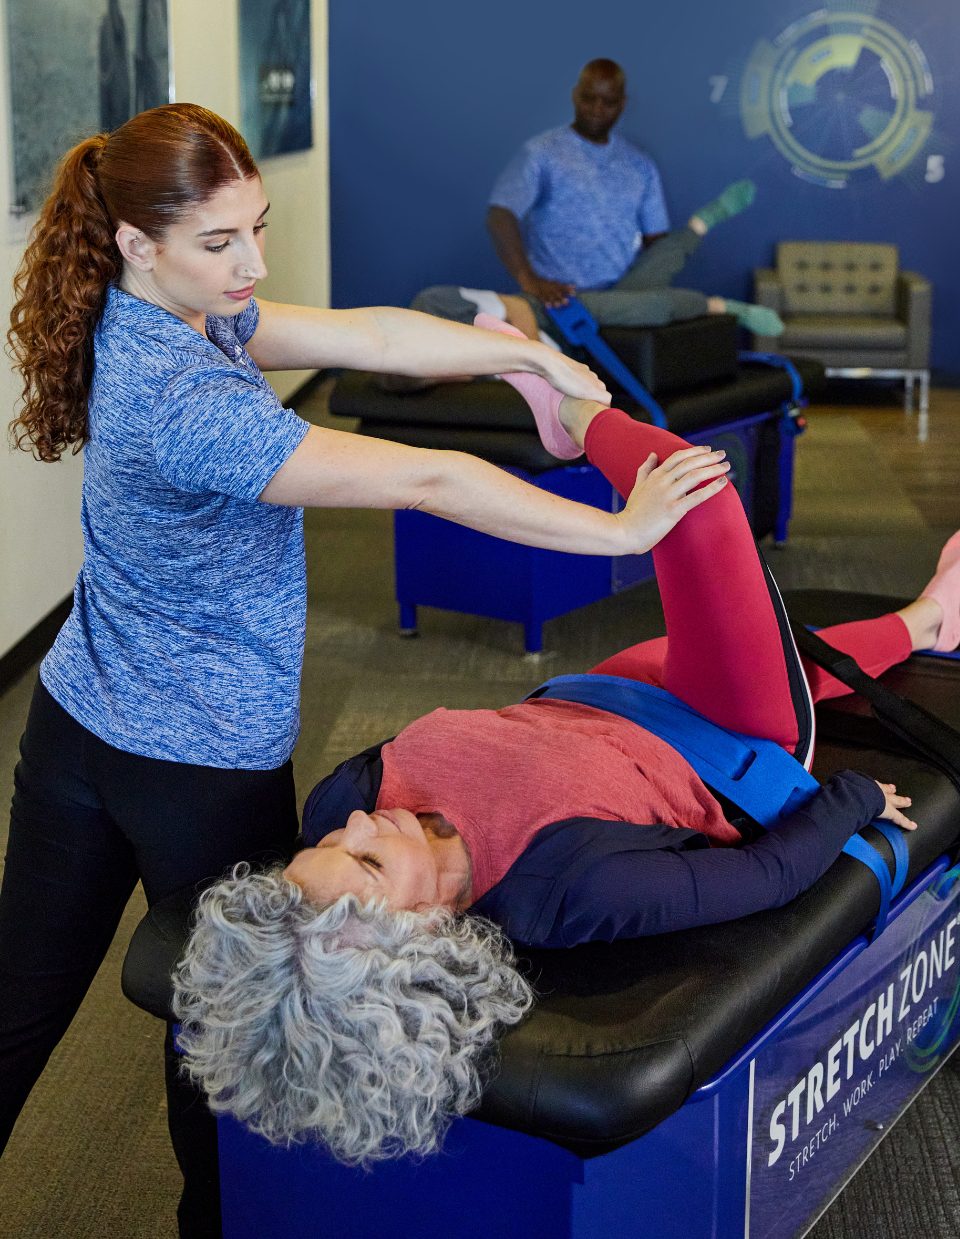 Stretch Zone - Feel the Benefits of Practitioner-Assisted Stretching